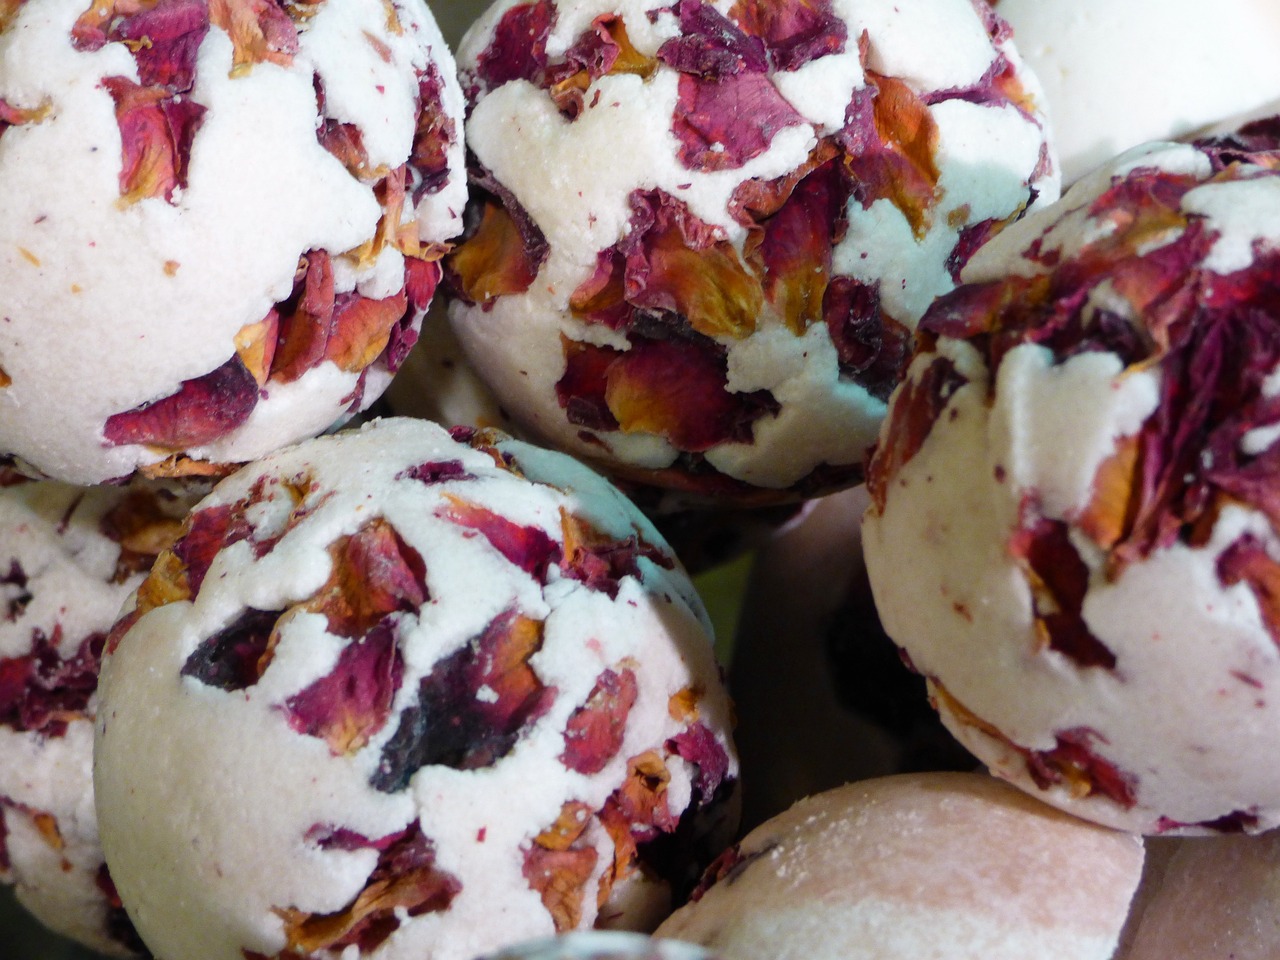 a close up of a bunch of balls of food, inspired by Balázs Diószegi, process art, rose petals, vanilla, infused with a dream, bath